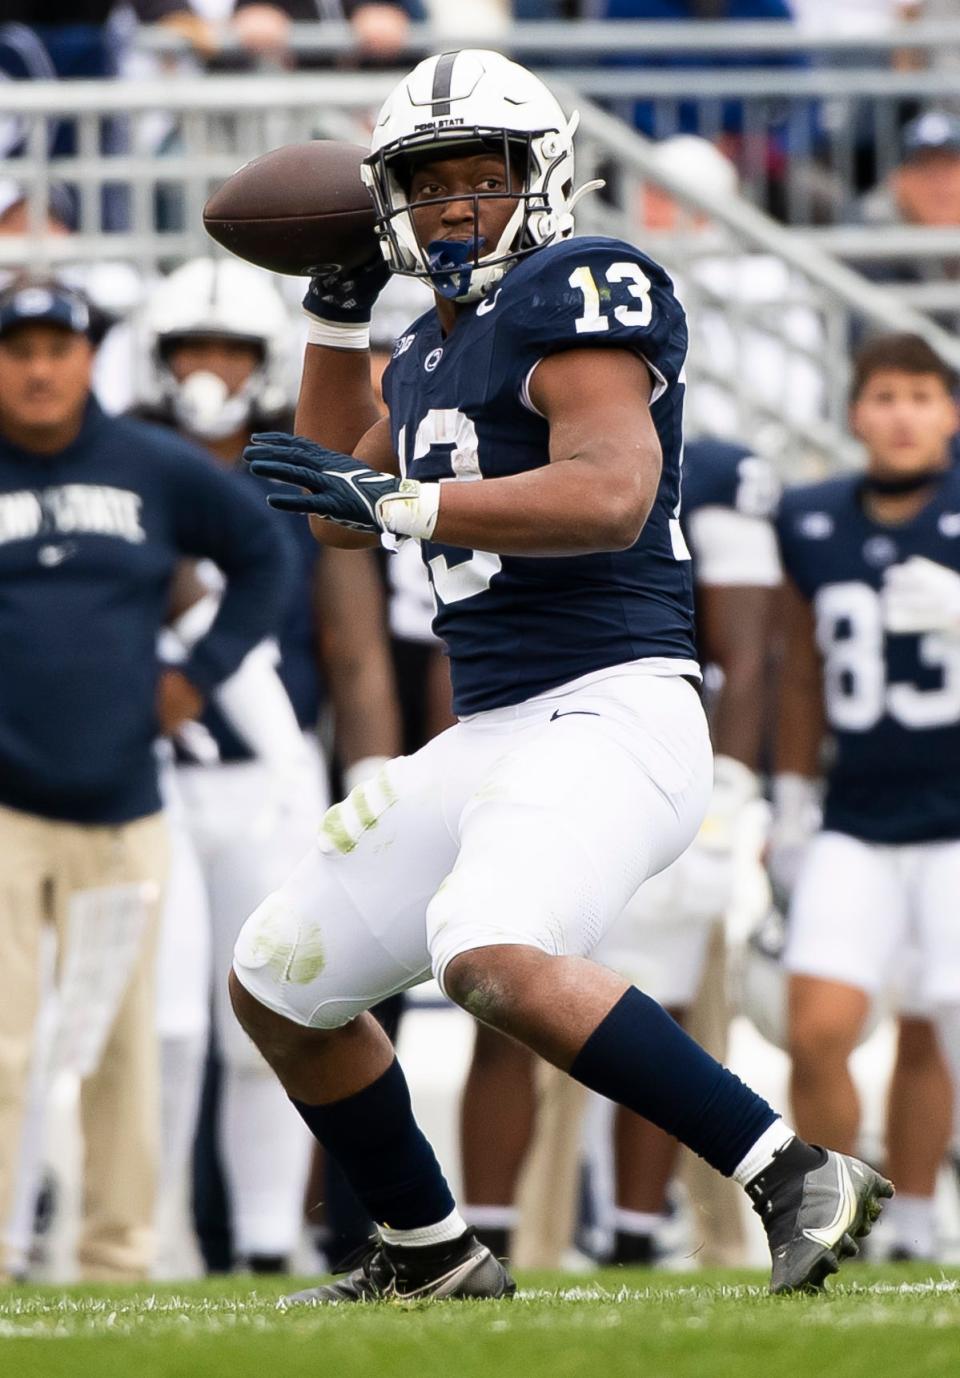 Penn State running back Kaytron Allen throws a pass to quarterback Drew Allar for a first down during an NCAA football game against Michigan Saturday, Nov. 11, 2023, in State College, Pa.